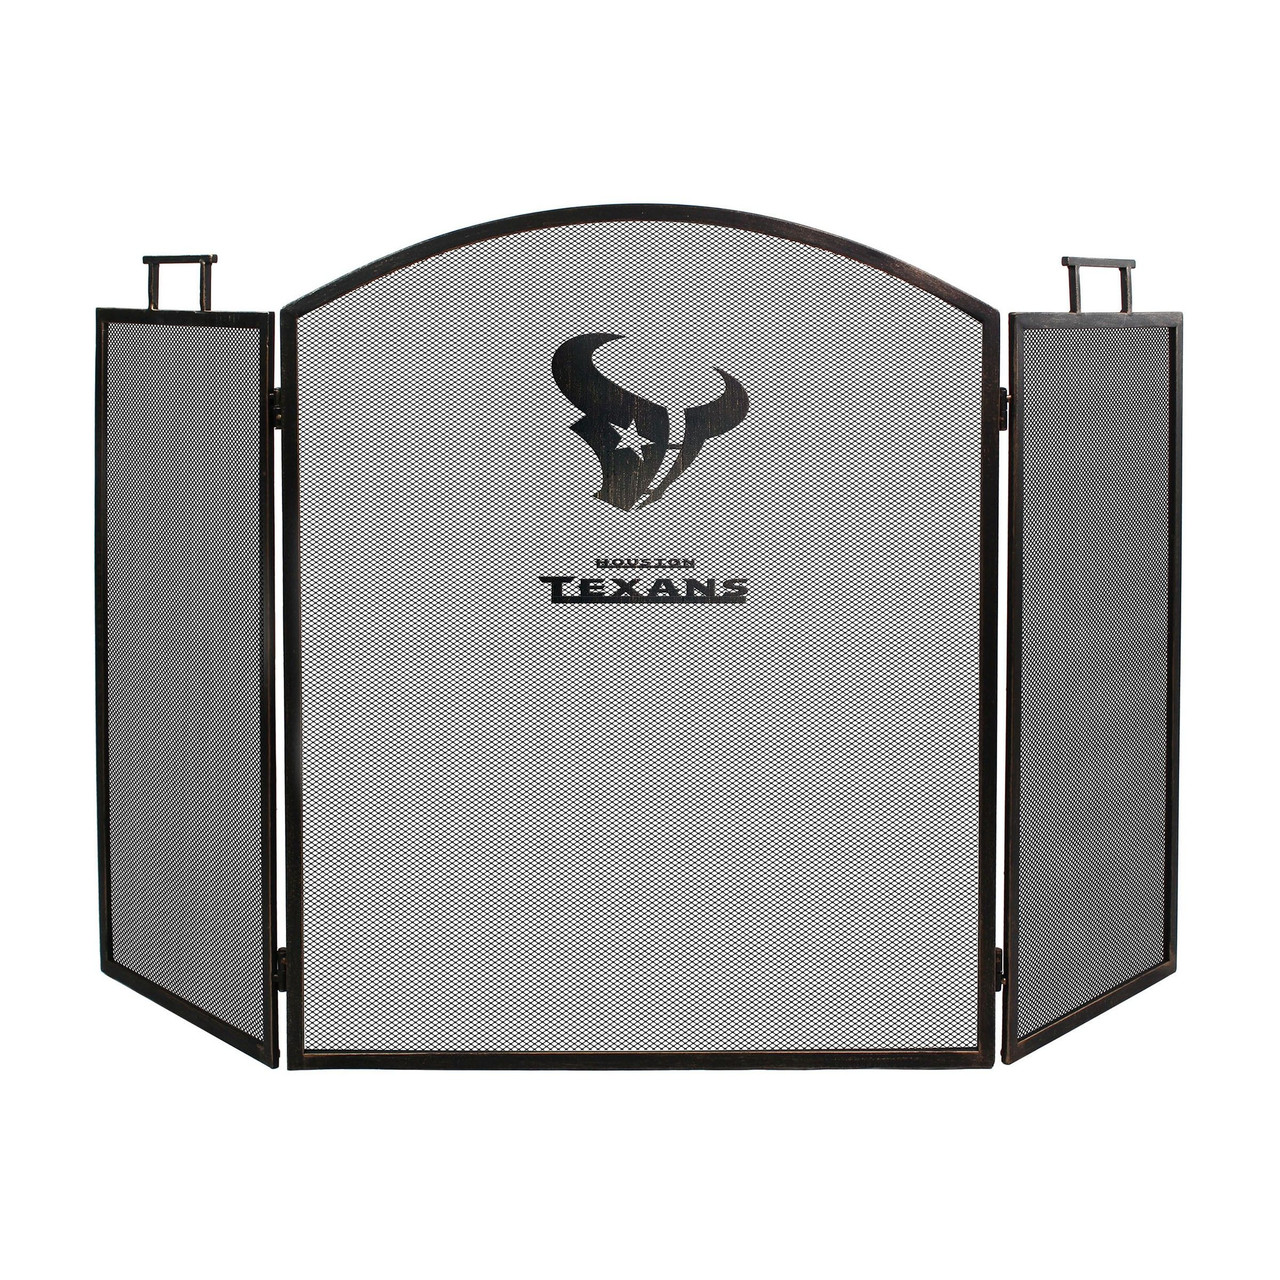 536-1034, Houston, HOU, Texans, Fireplace, Screen, Wrought Iron, Bronze, NFL, Imperial, 720801536347